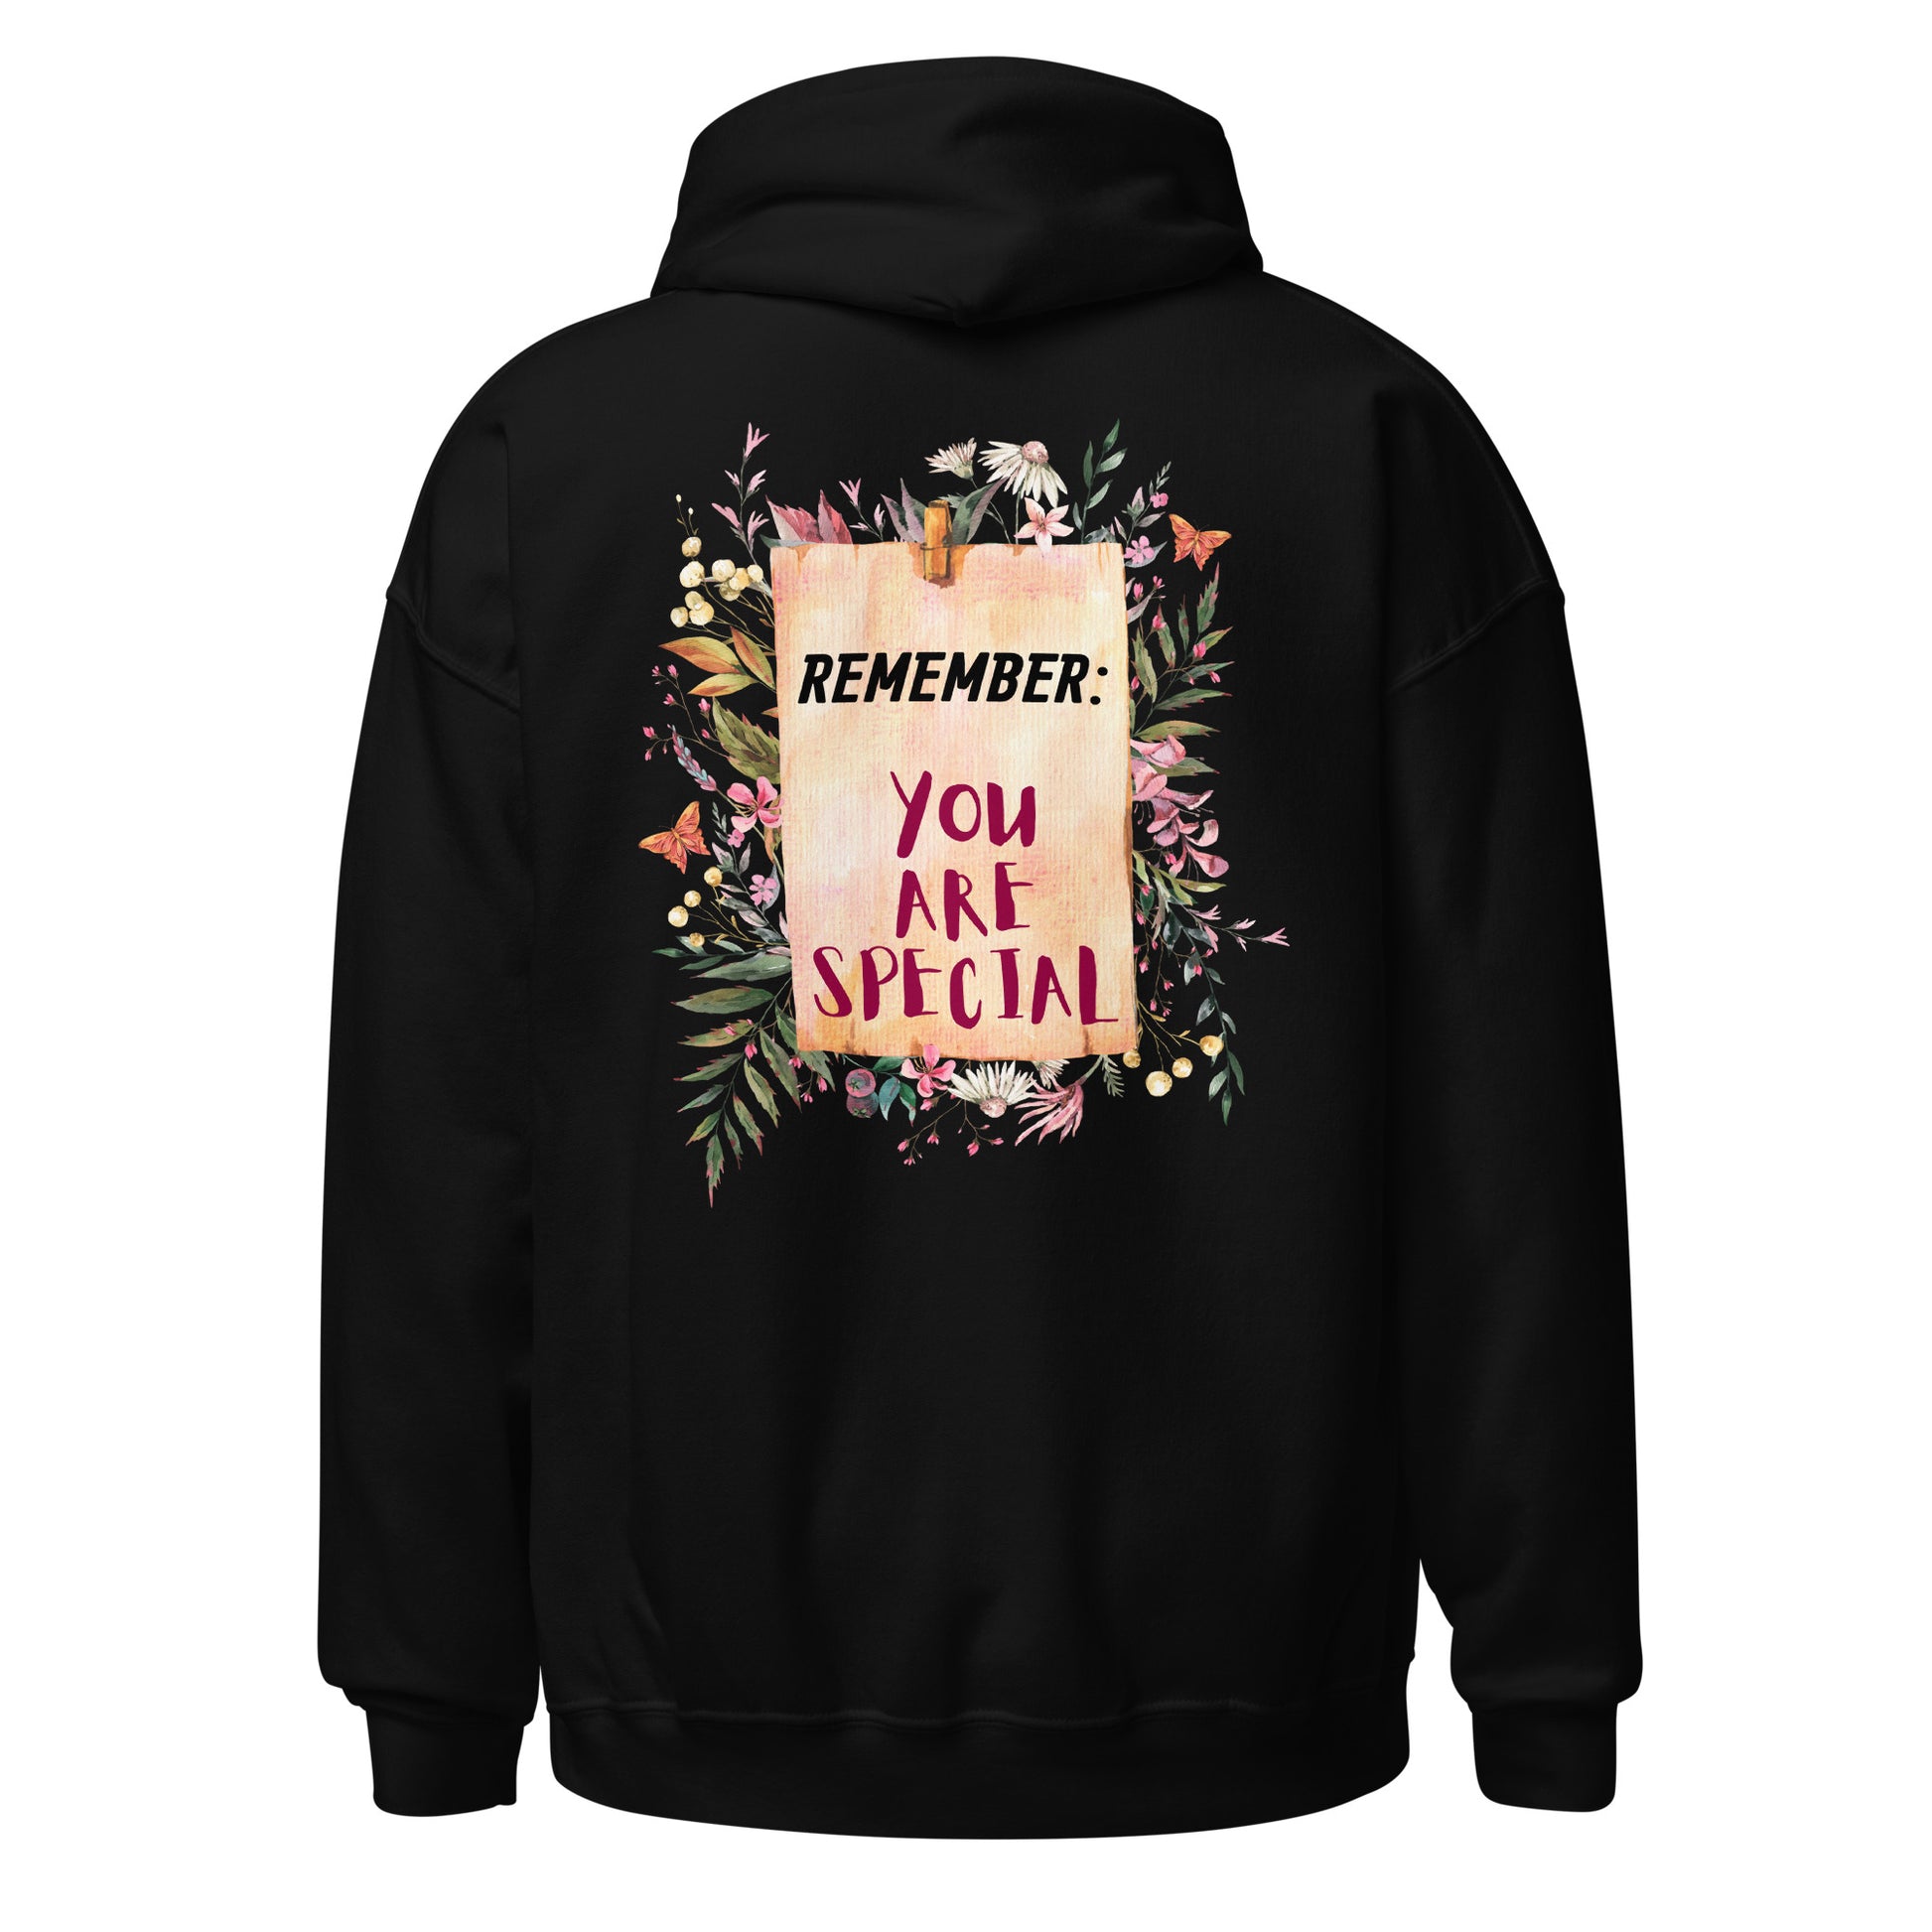 Inspirational Pullover Hoodie featuring the powerful affirmation, "Remember: You Are Special." The vintage-inspired design, featuring a floral botanical reminder note, adds a touch of timeless elegance to their attire. Black Hoodie